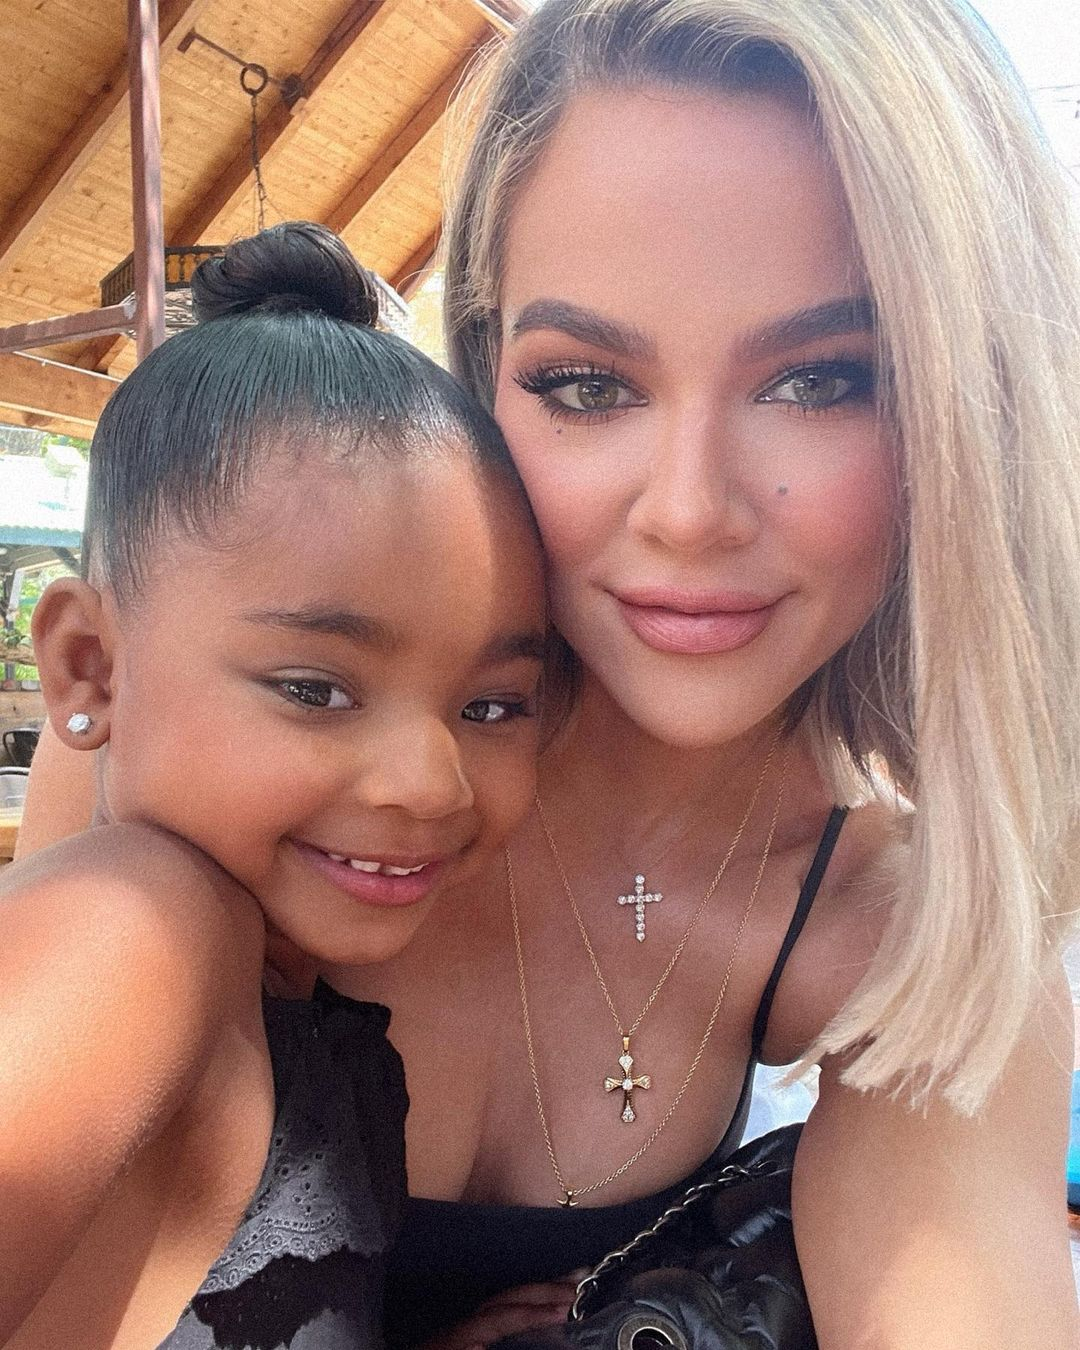 Tristan Thompson’s baby mama Maralee Nichols shares rare photos of son Theo at his 1st birthday party without NBA star